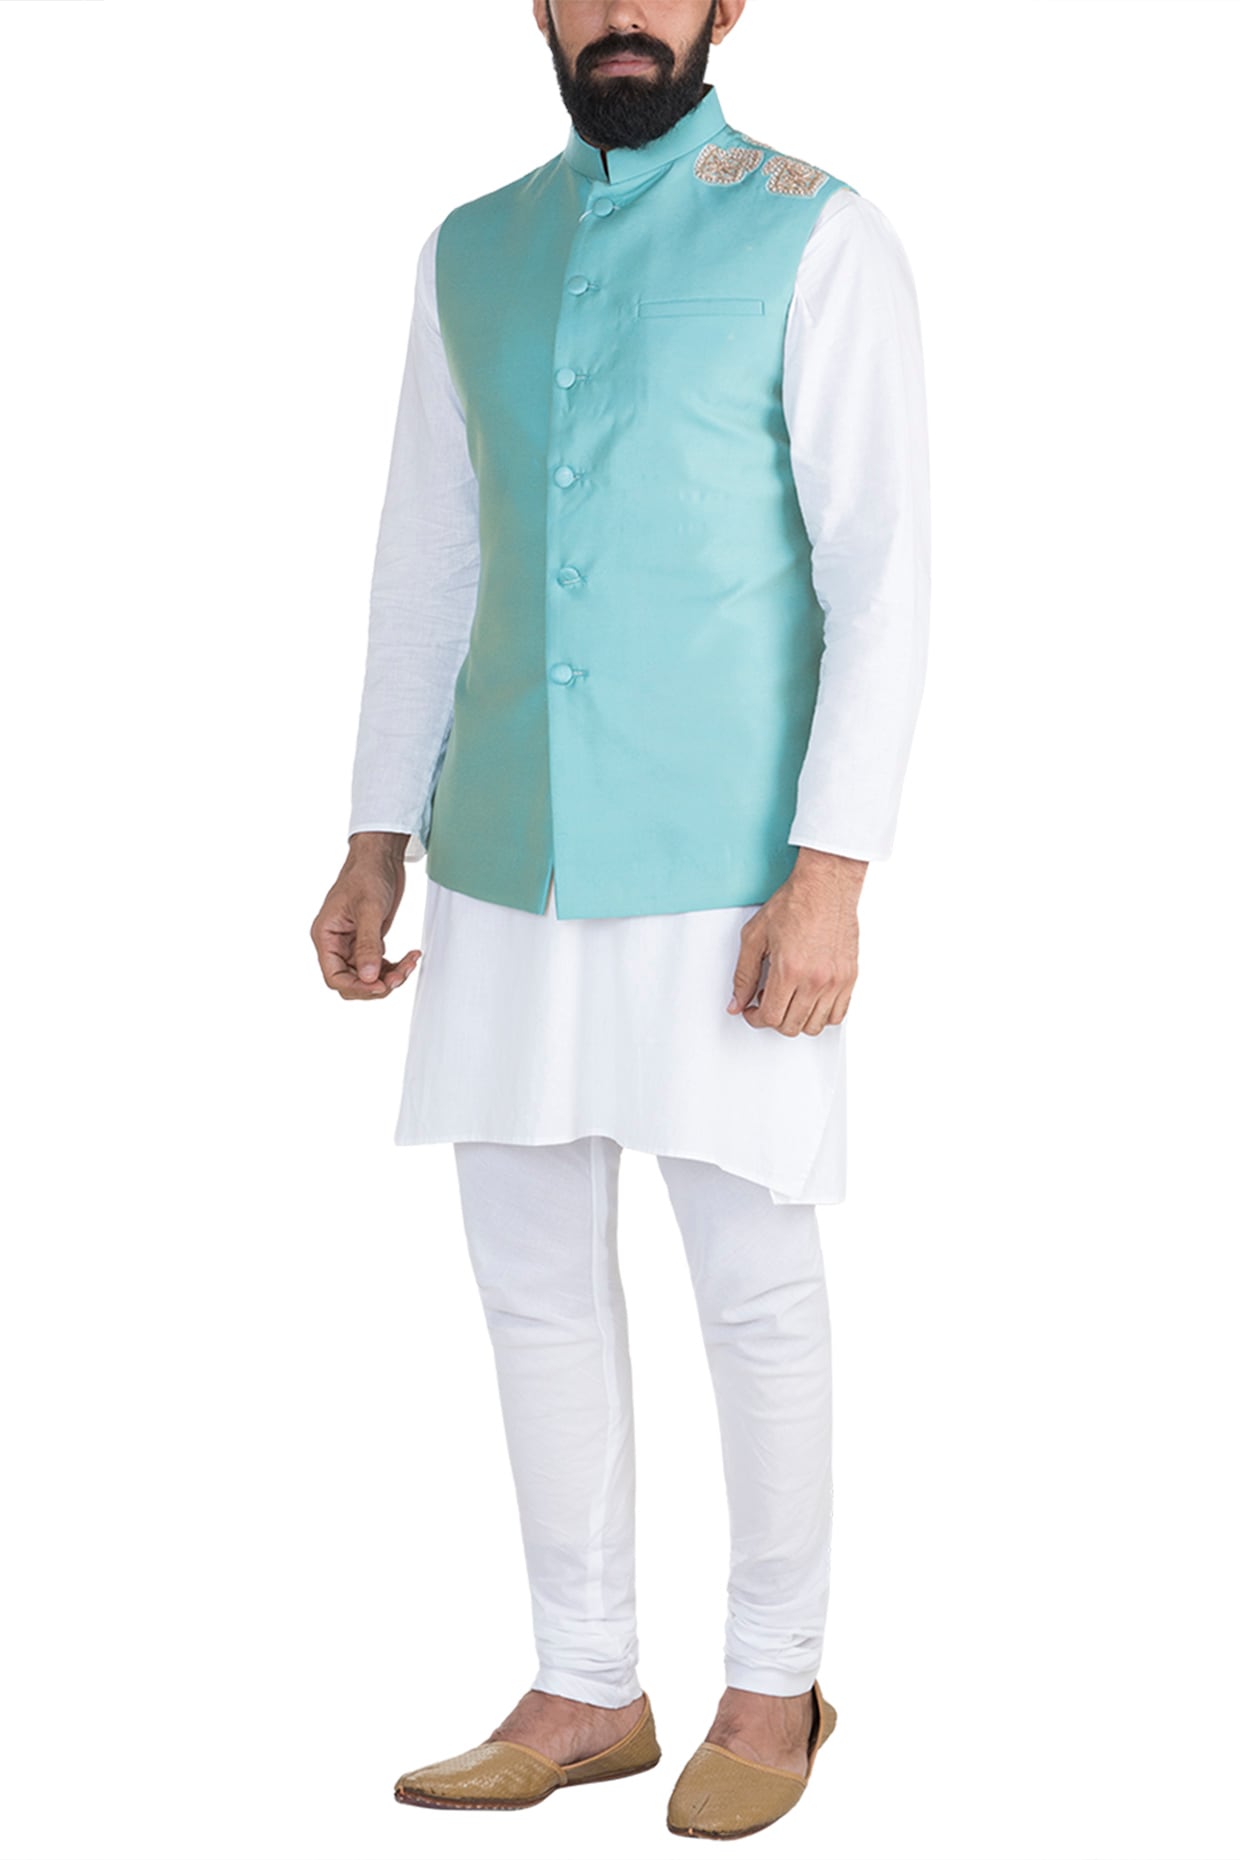 Buy Off White Cotton Silk Digital Print Floral Patterns Lakeer Nehru Jacket  For Men by Ankit V Kapoor Online at Aza Fashions.